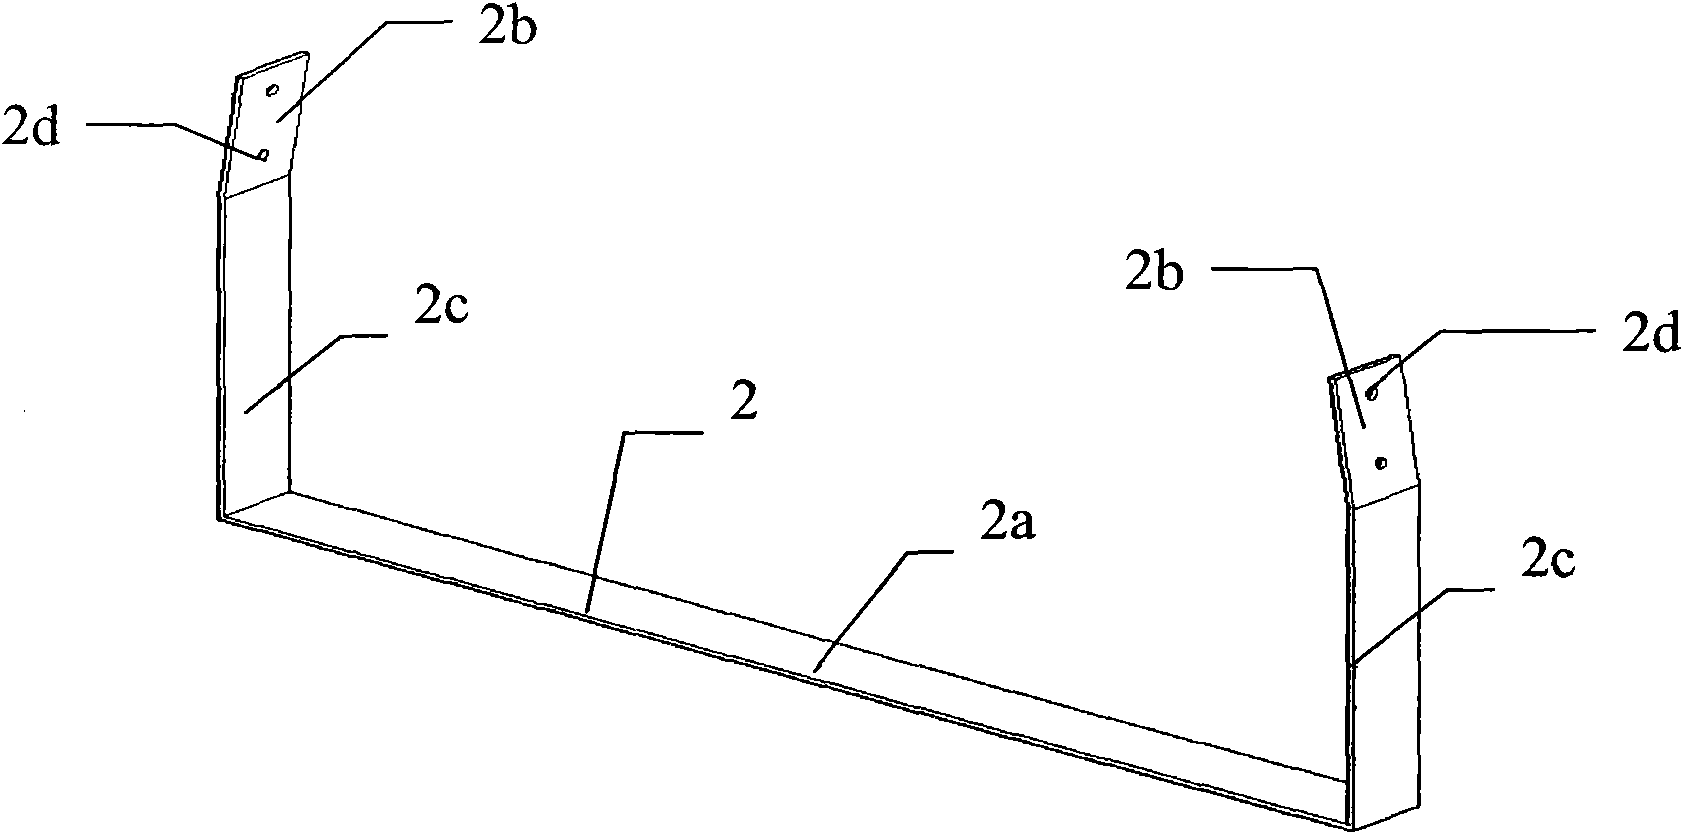 Roof gutter system capable of generating slope